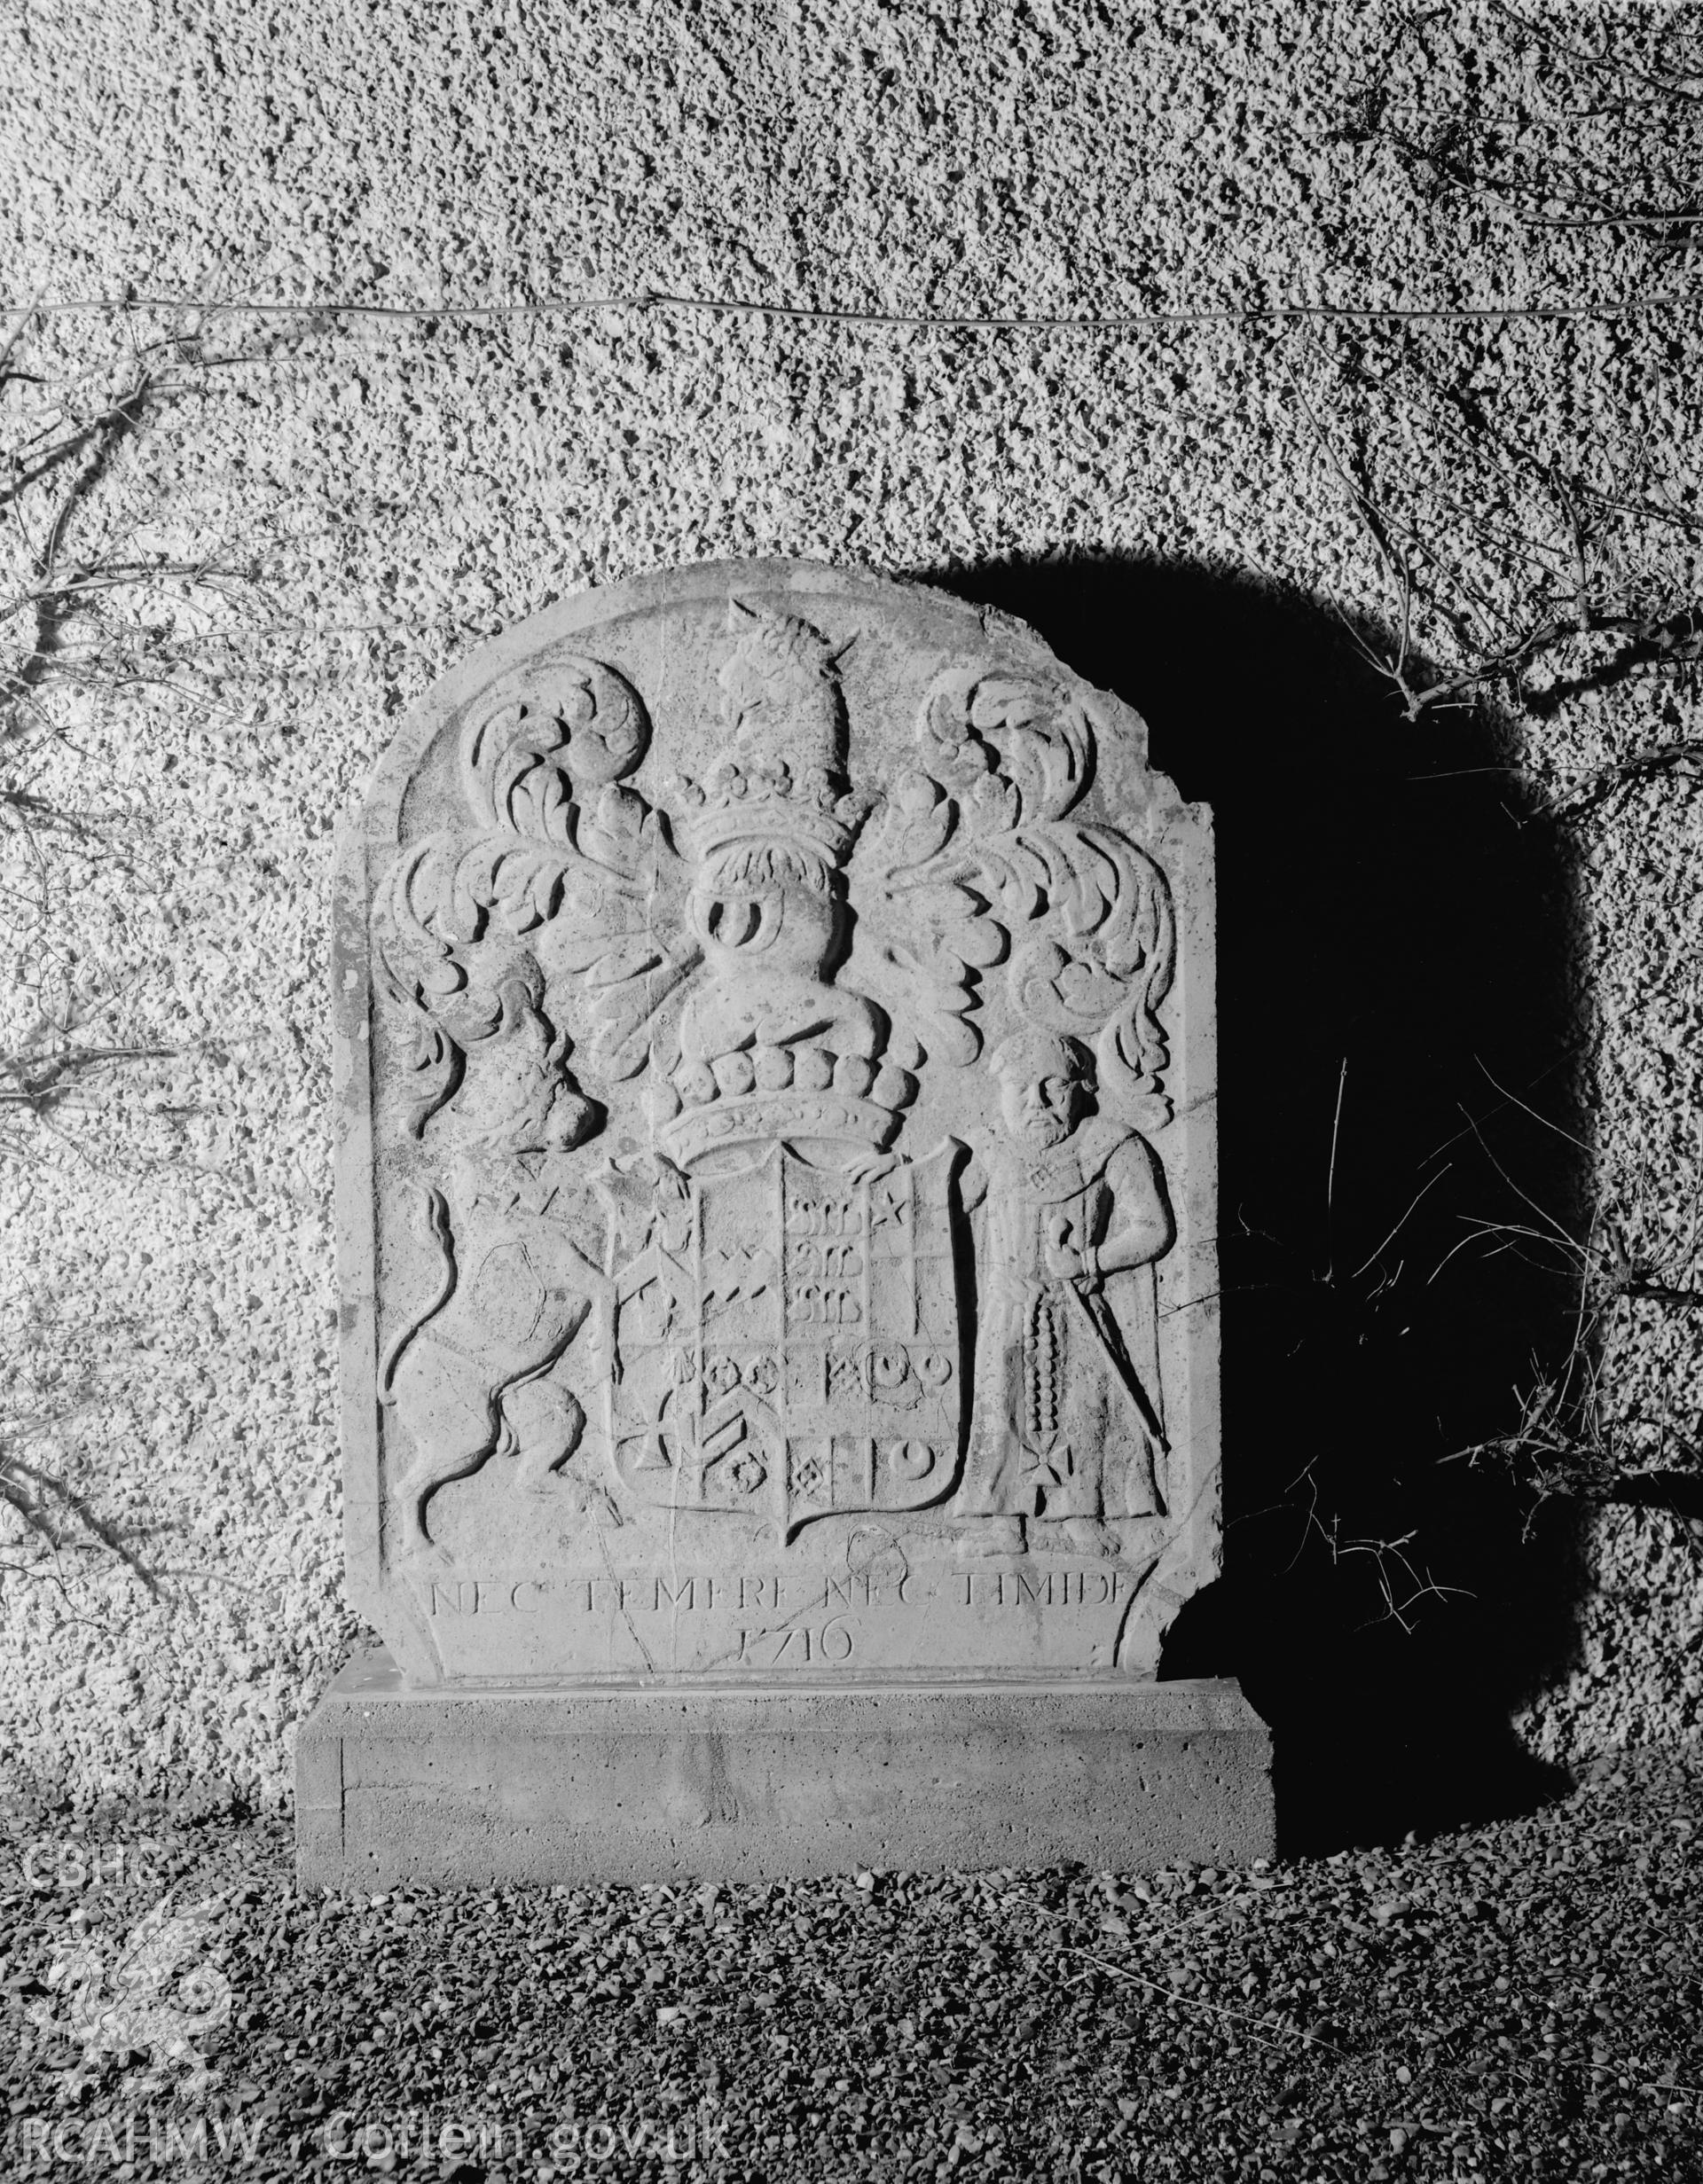 Black and white photo of the armorial stone, Baron Hill, Beaumaris, now at Pen-Y-Parc, Beaumaris.